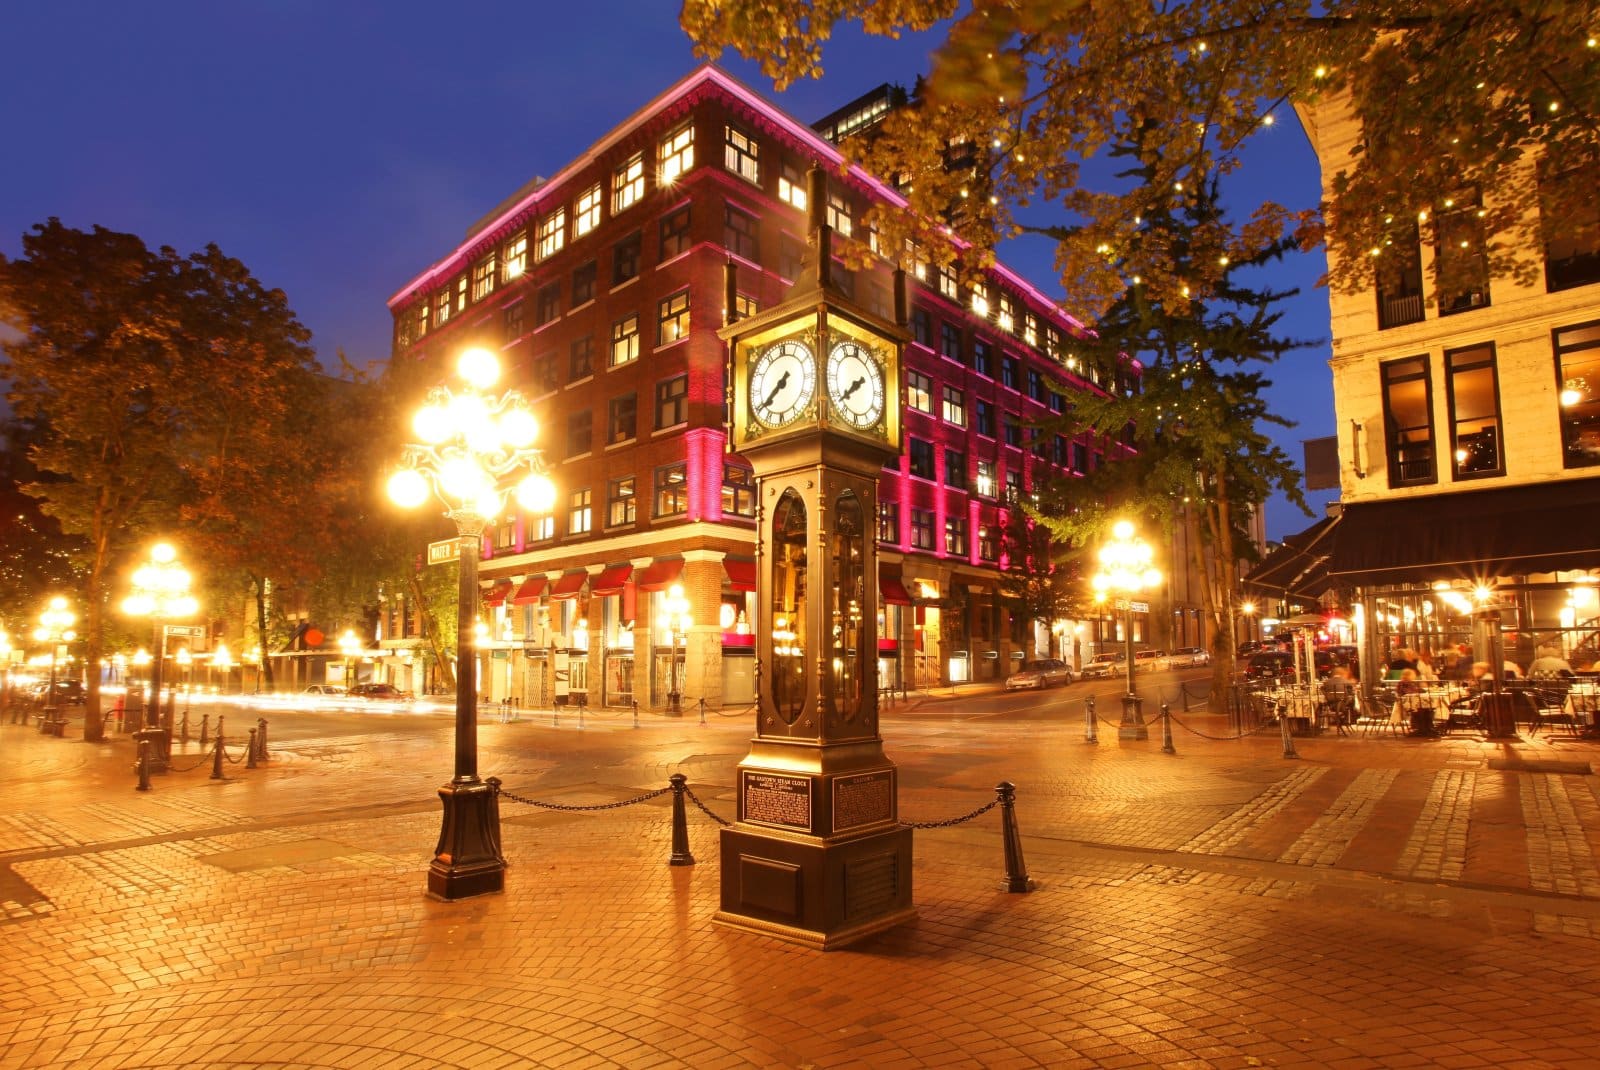 <p class="wp-caption-text">Image Credit: Shutterstock / Dan Breckwoldt</p>  <p><span>Gastown, Vancouver’s oldest neighborhood, combines historic charm with contemporary culture. Cobblestone streets are lined with Victorian buildings that house independent boutiques, art galleries, and some of the city’s most innovative restaurants and bars. Dining in Gastown means experiencing a fusion of cuisines in settings that range from casual to upscale, all within the atmospheric glow of the area’s famous steam clock. I dined in Miku Restaurant for its expertise in Aburi, or flame-seared sushi, which involves lightly searing the sushi with a flame to enhance its natural flavors and textures. The owner, Seigo Nakamura, has taken the Aburi concept further by creating specialty sauces with non-traditional Japanese ingredients tailored to complement each type of fish. Michelin recommends the restaurant and it has been awarded the Golden Plate for Best Japanese Restaurant in Vancouver by Georgia Straight.</span></p>